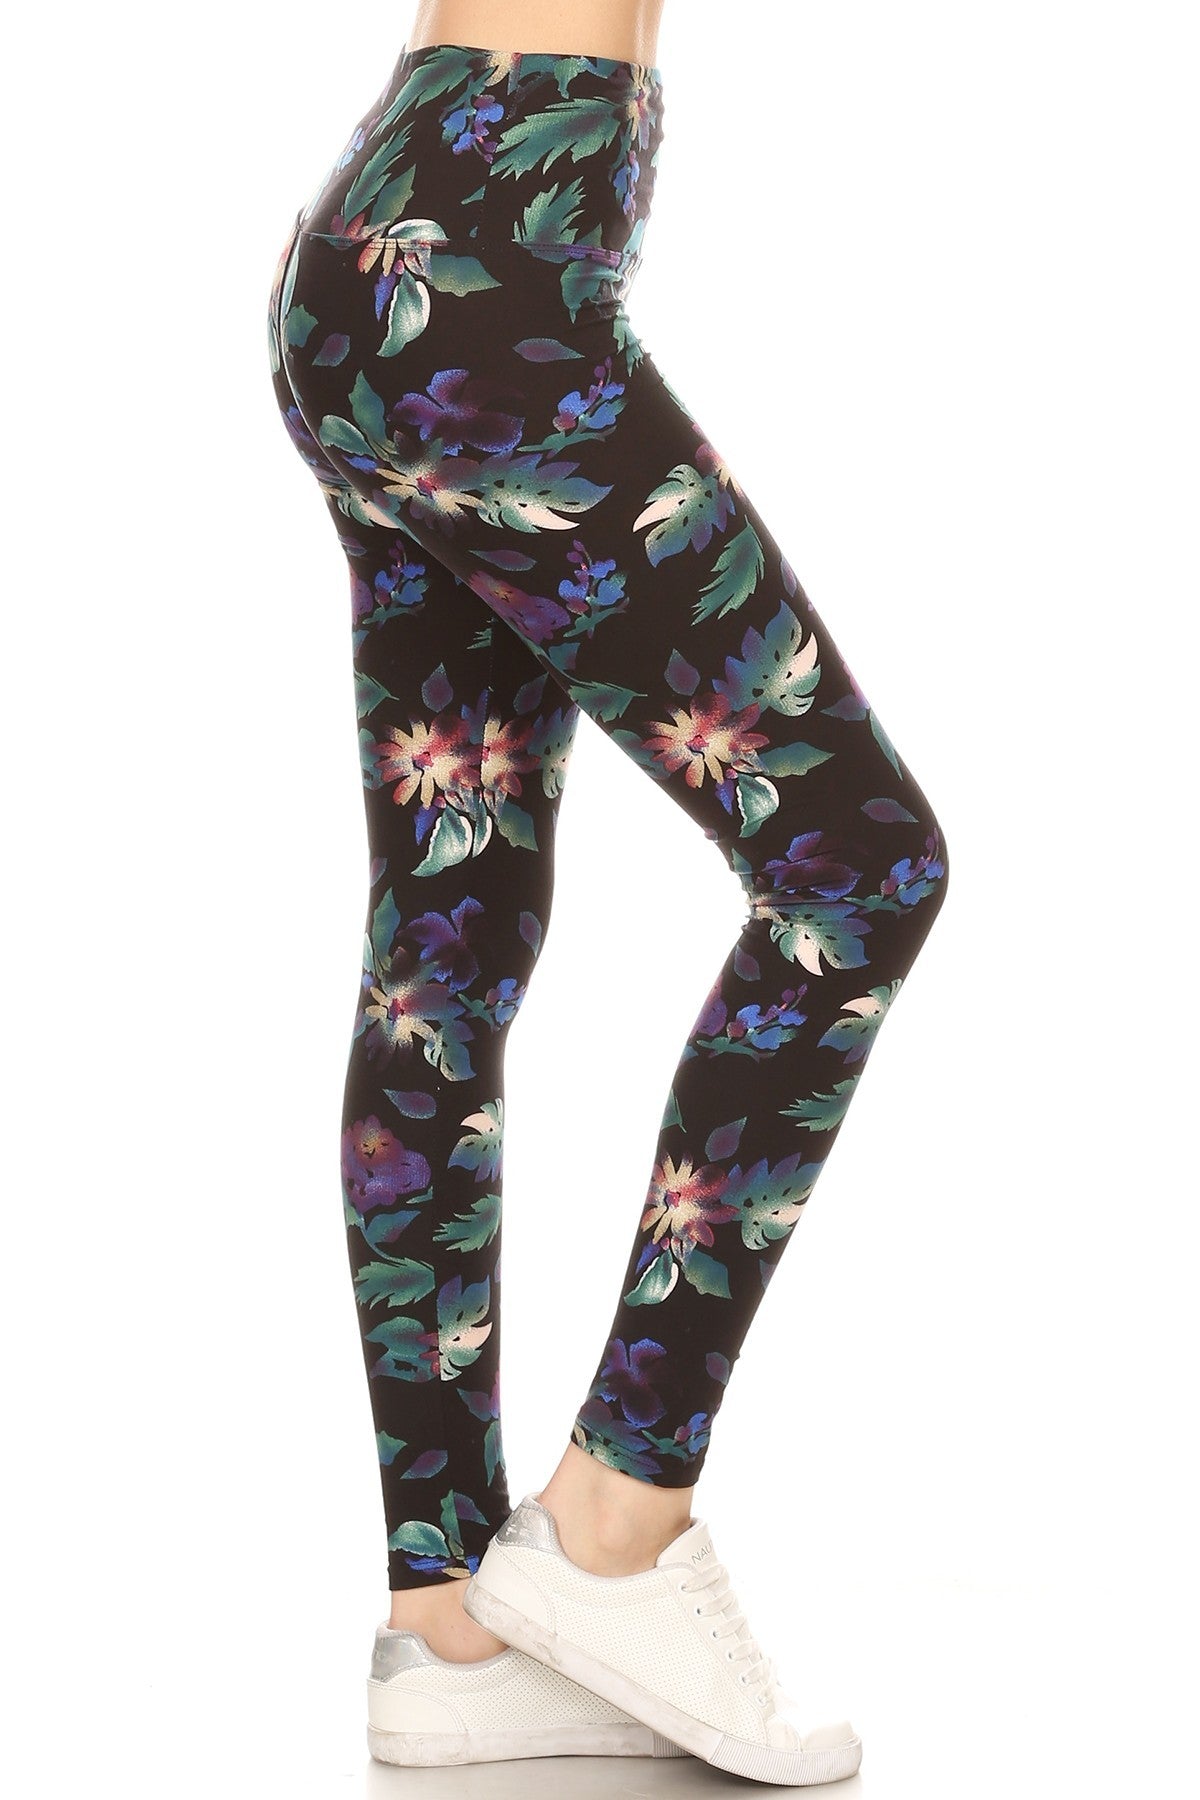 Long Yoga Style Banded Lined Floral Printed Knit Legging With High Waist